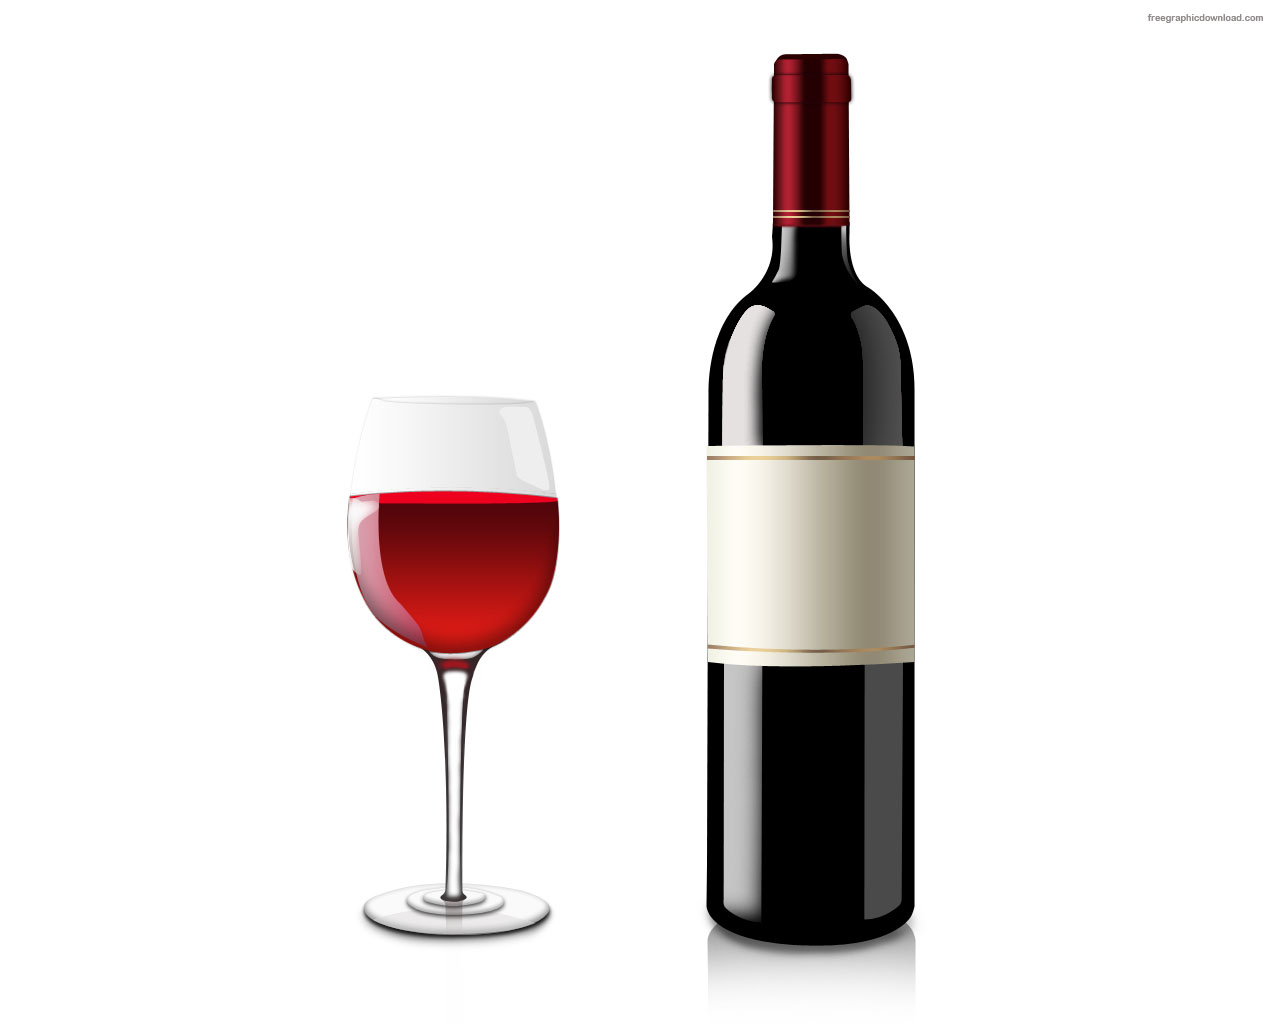 Red Wine Bottle And Wine Glass Psd B Jpg